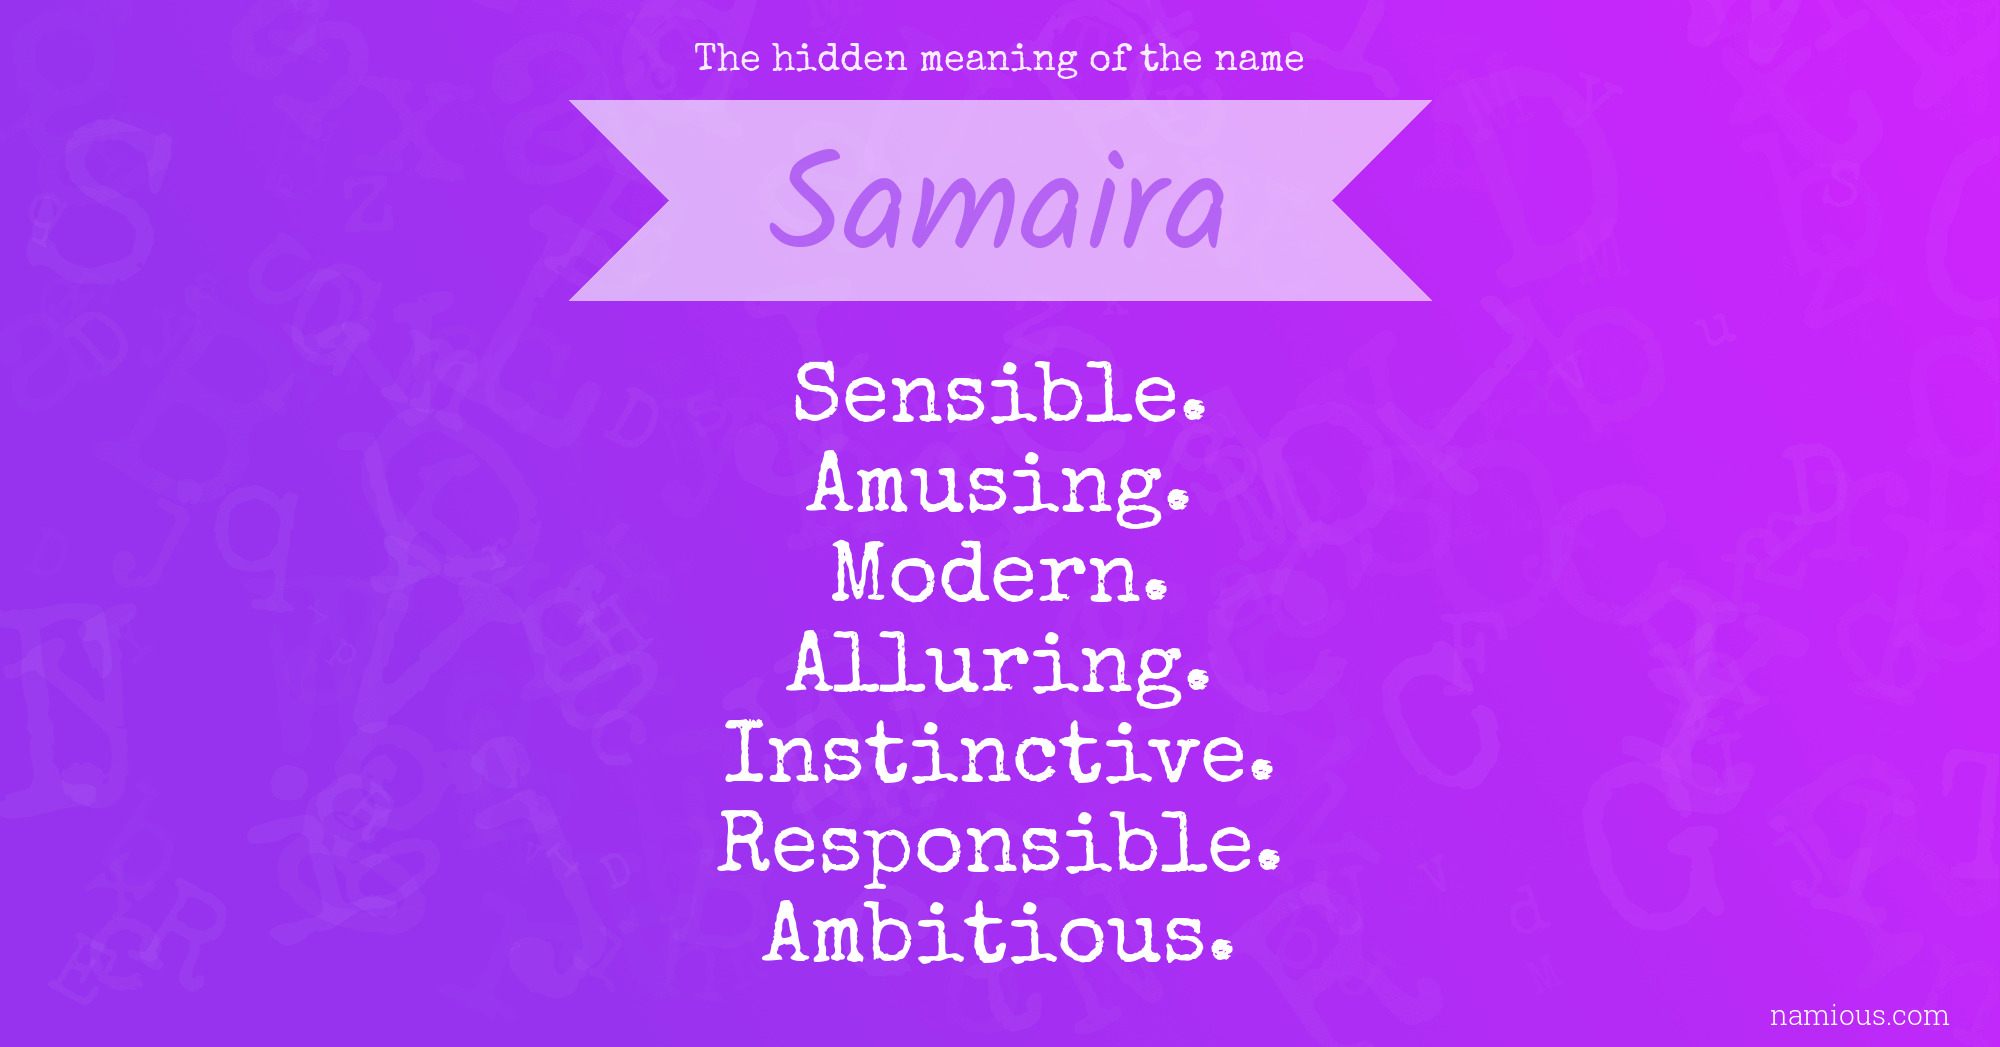 The hidden meaning of the name Samaira